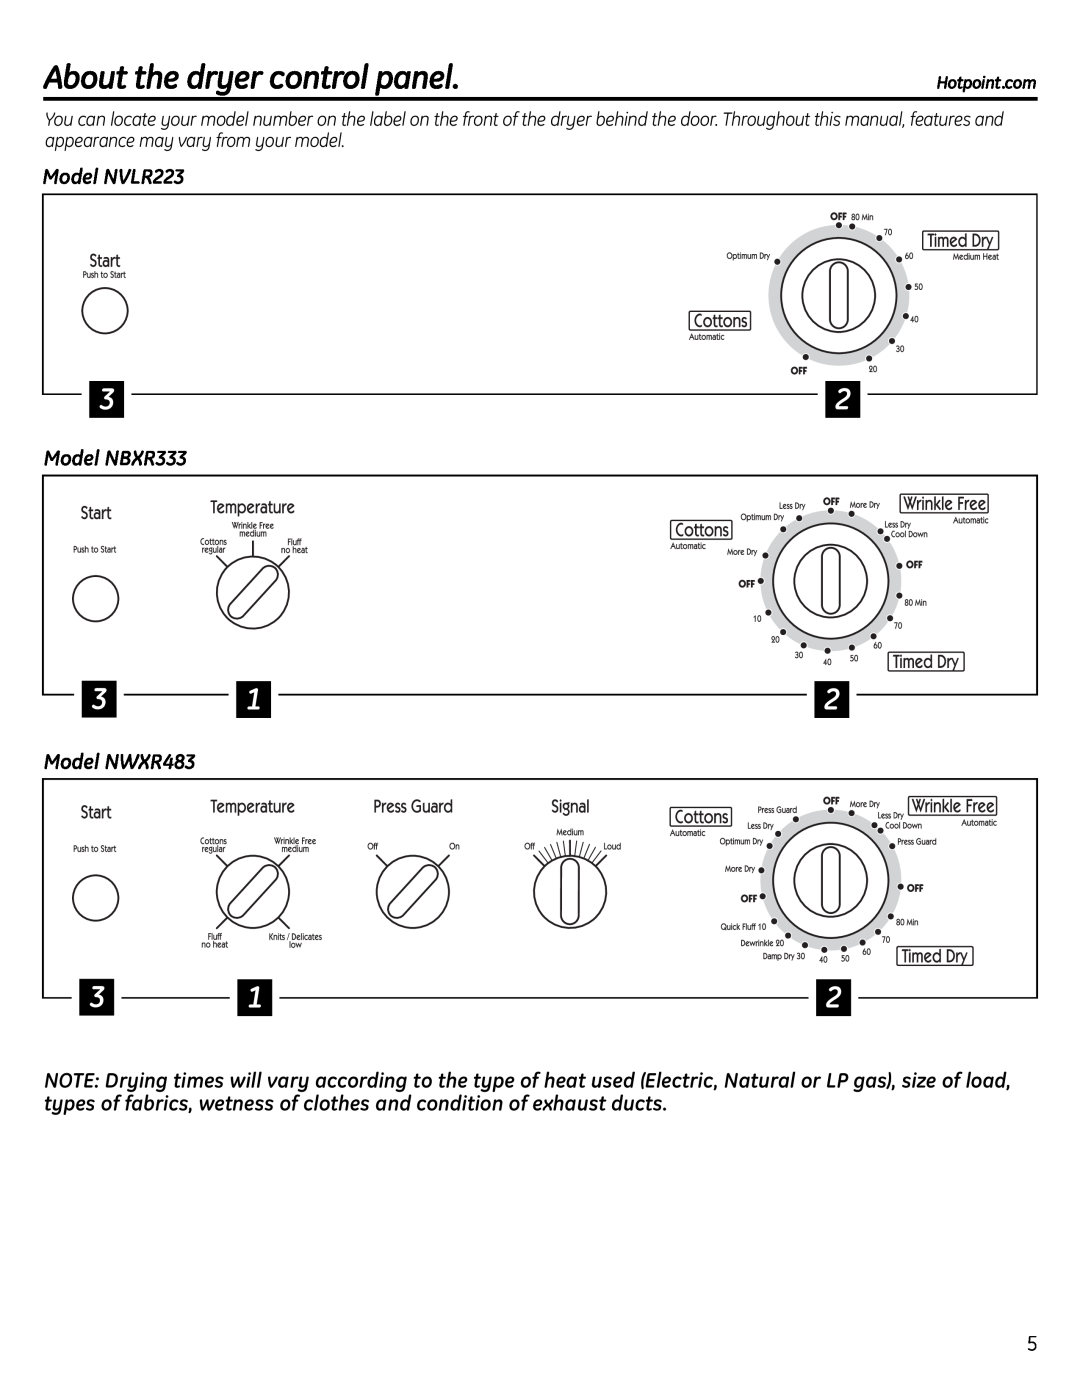 Hotpoint NBXR333 owner manual About the dryer control panel 